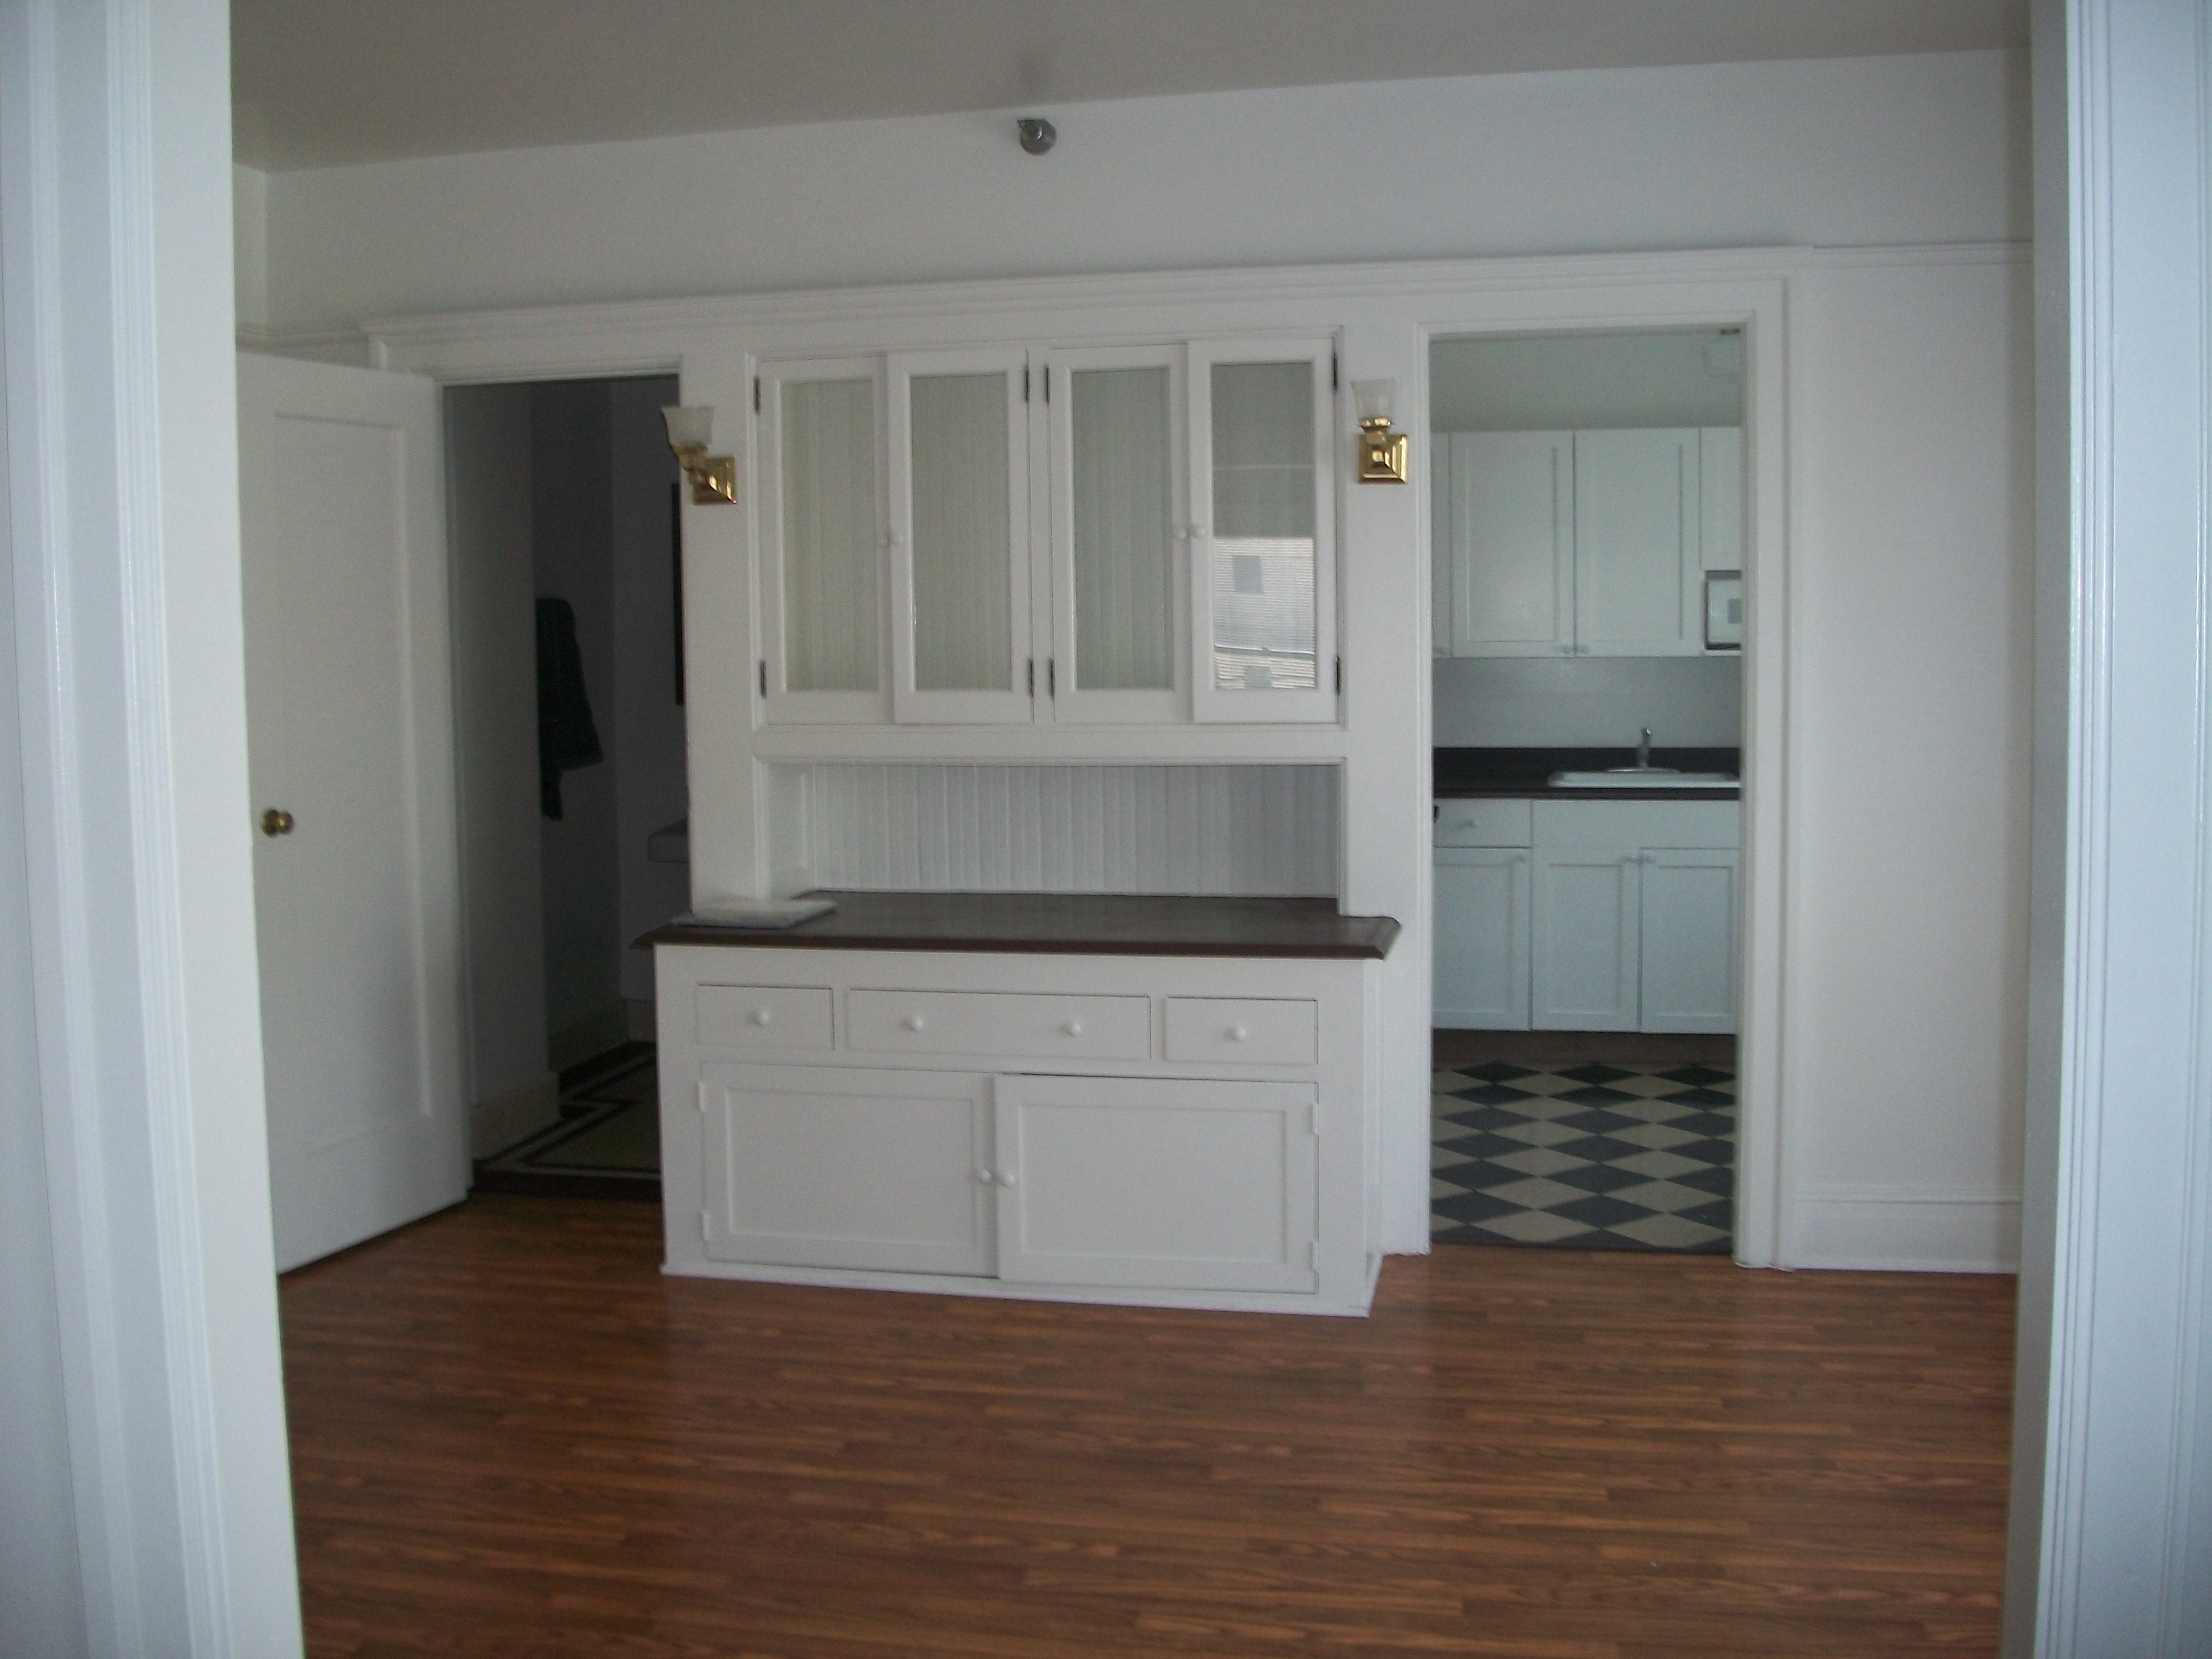 Interio view of a unit at the Younge Apartments. White walls with patterned floor tile in the kitchen. A built in hutch with dark counter space.